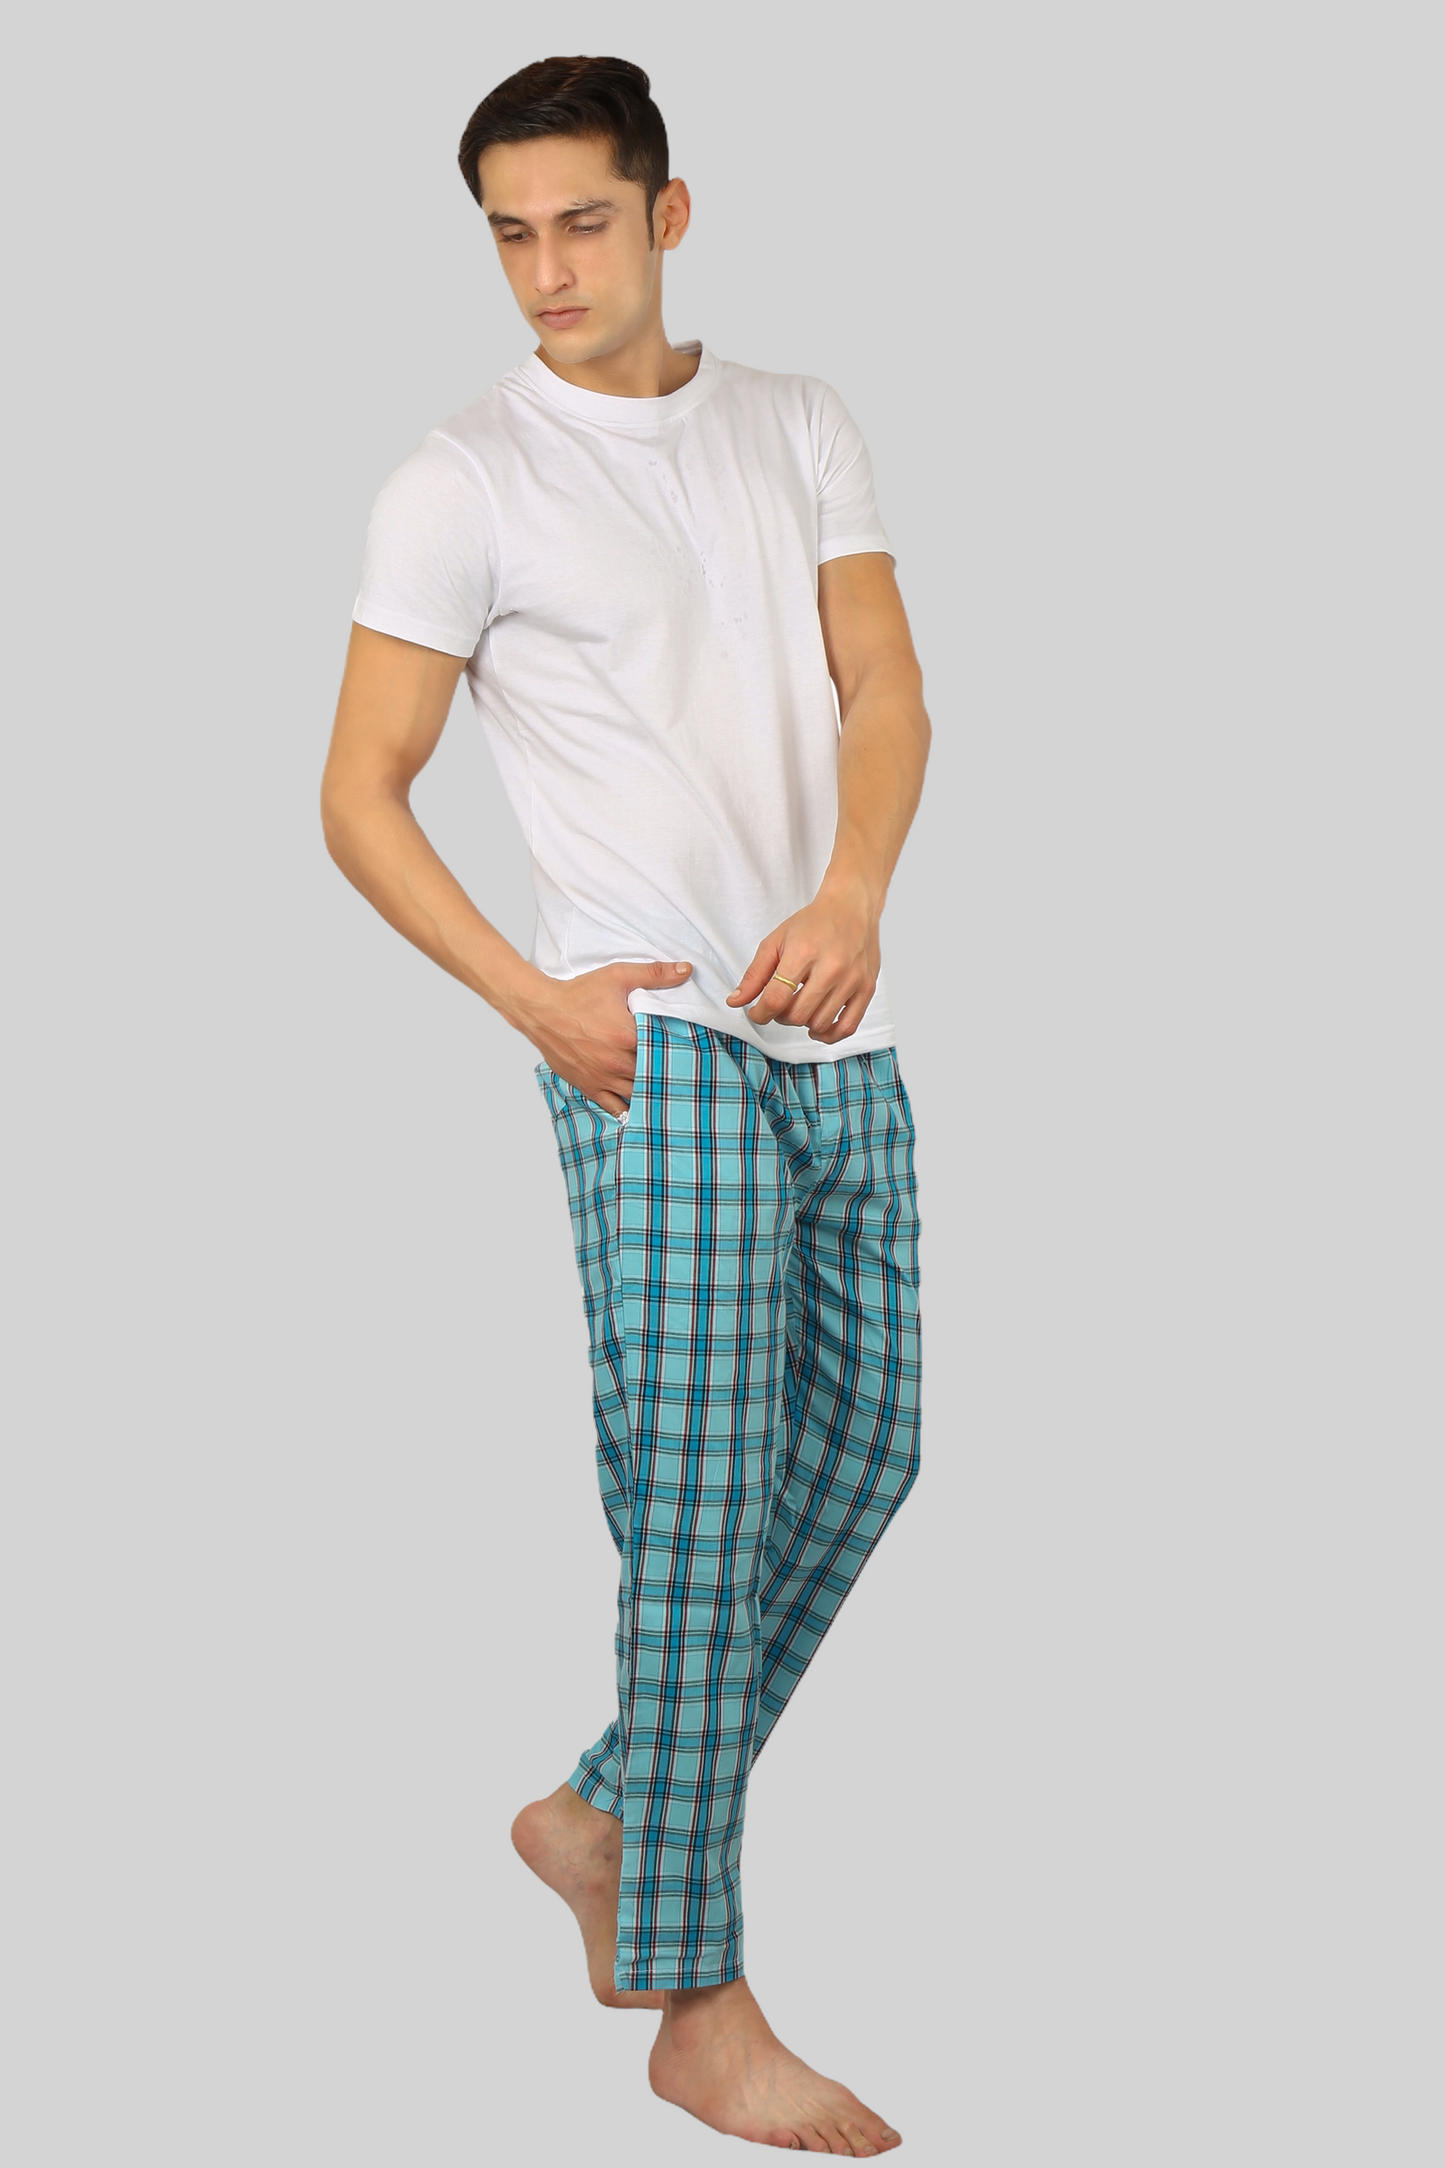 Baby Blue soft and super comfortable checkered pajamas for men